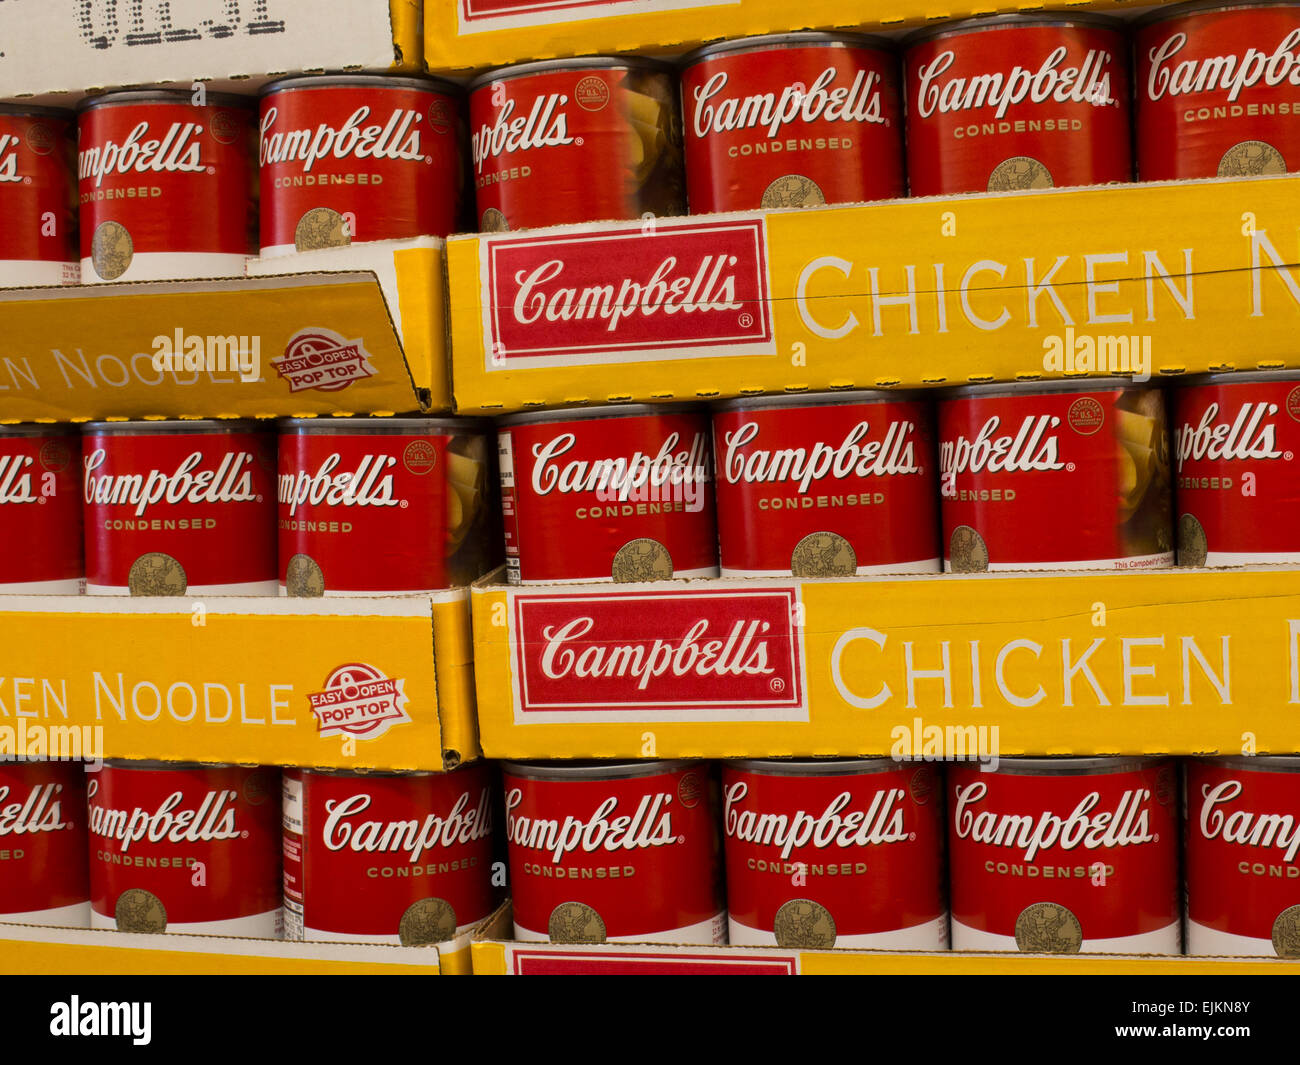 Cans of Campbell's chicken noodle soup are stacked in warehouse style supermarket. Stock Photo